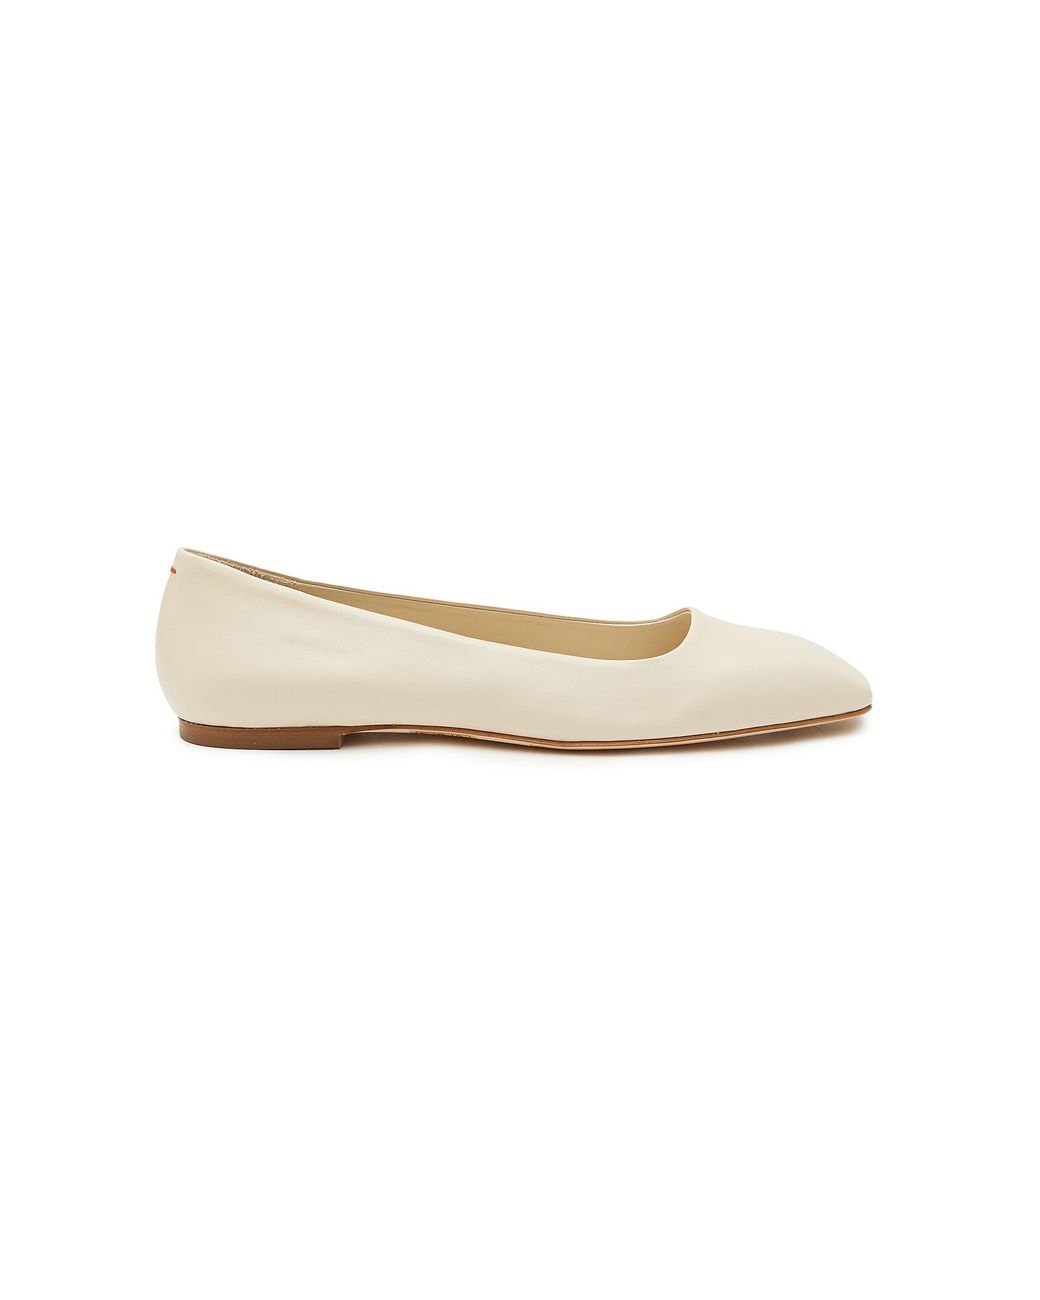 Aeyde 'ida' Square Toe Leather Ballerina Flats in White | Lyst